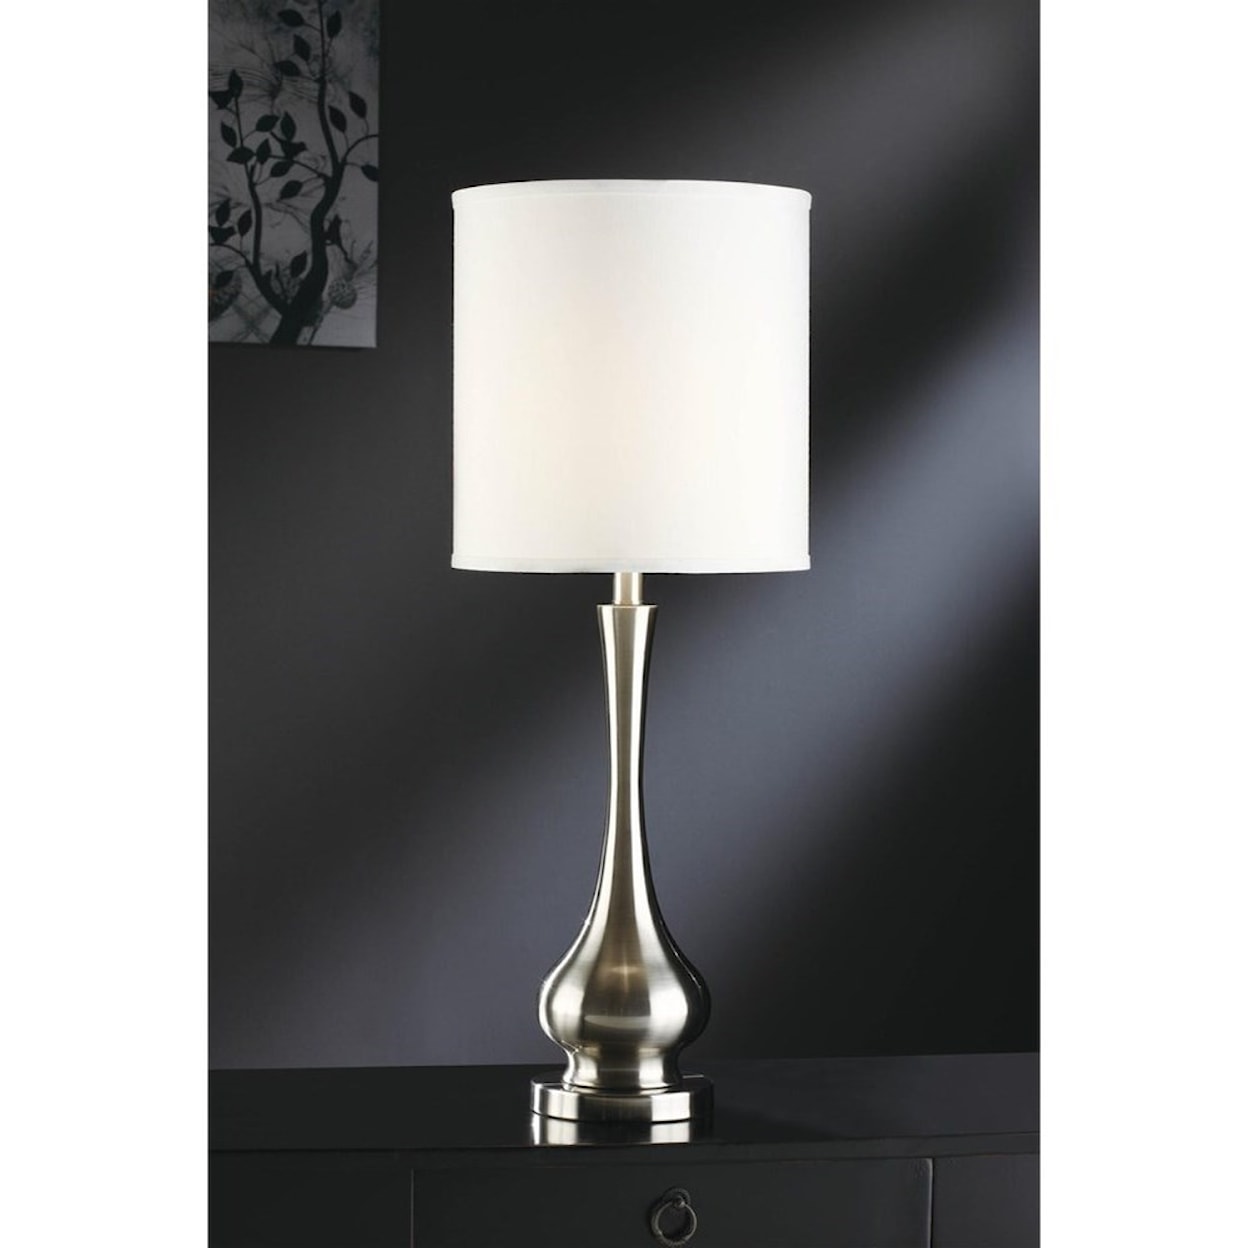 Crestview Collection Lighting Camden Table Lamp